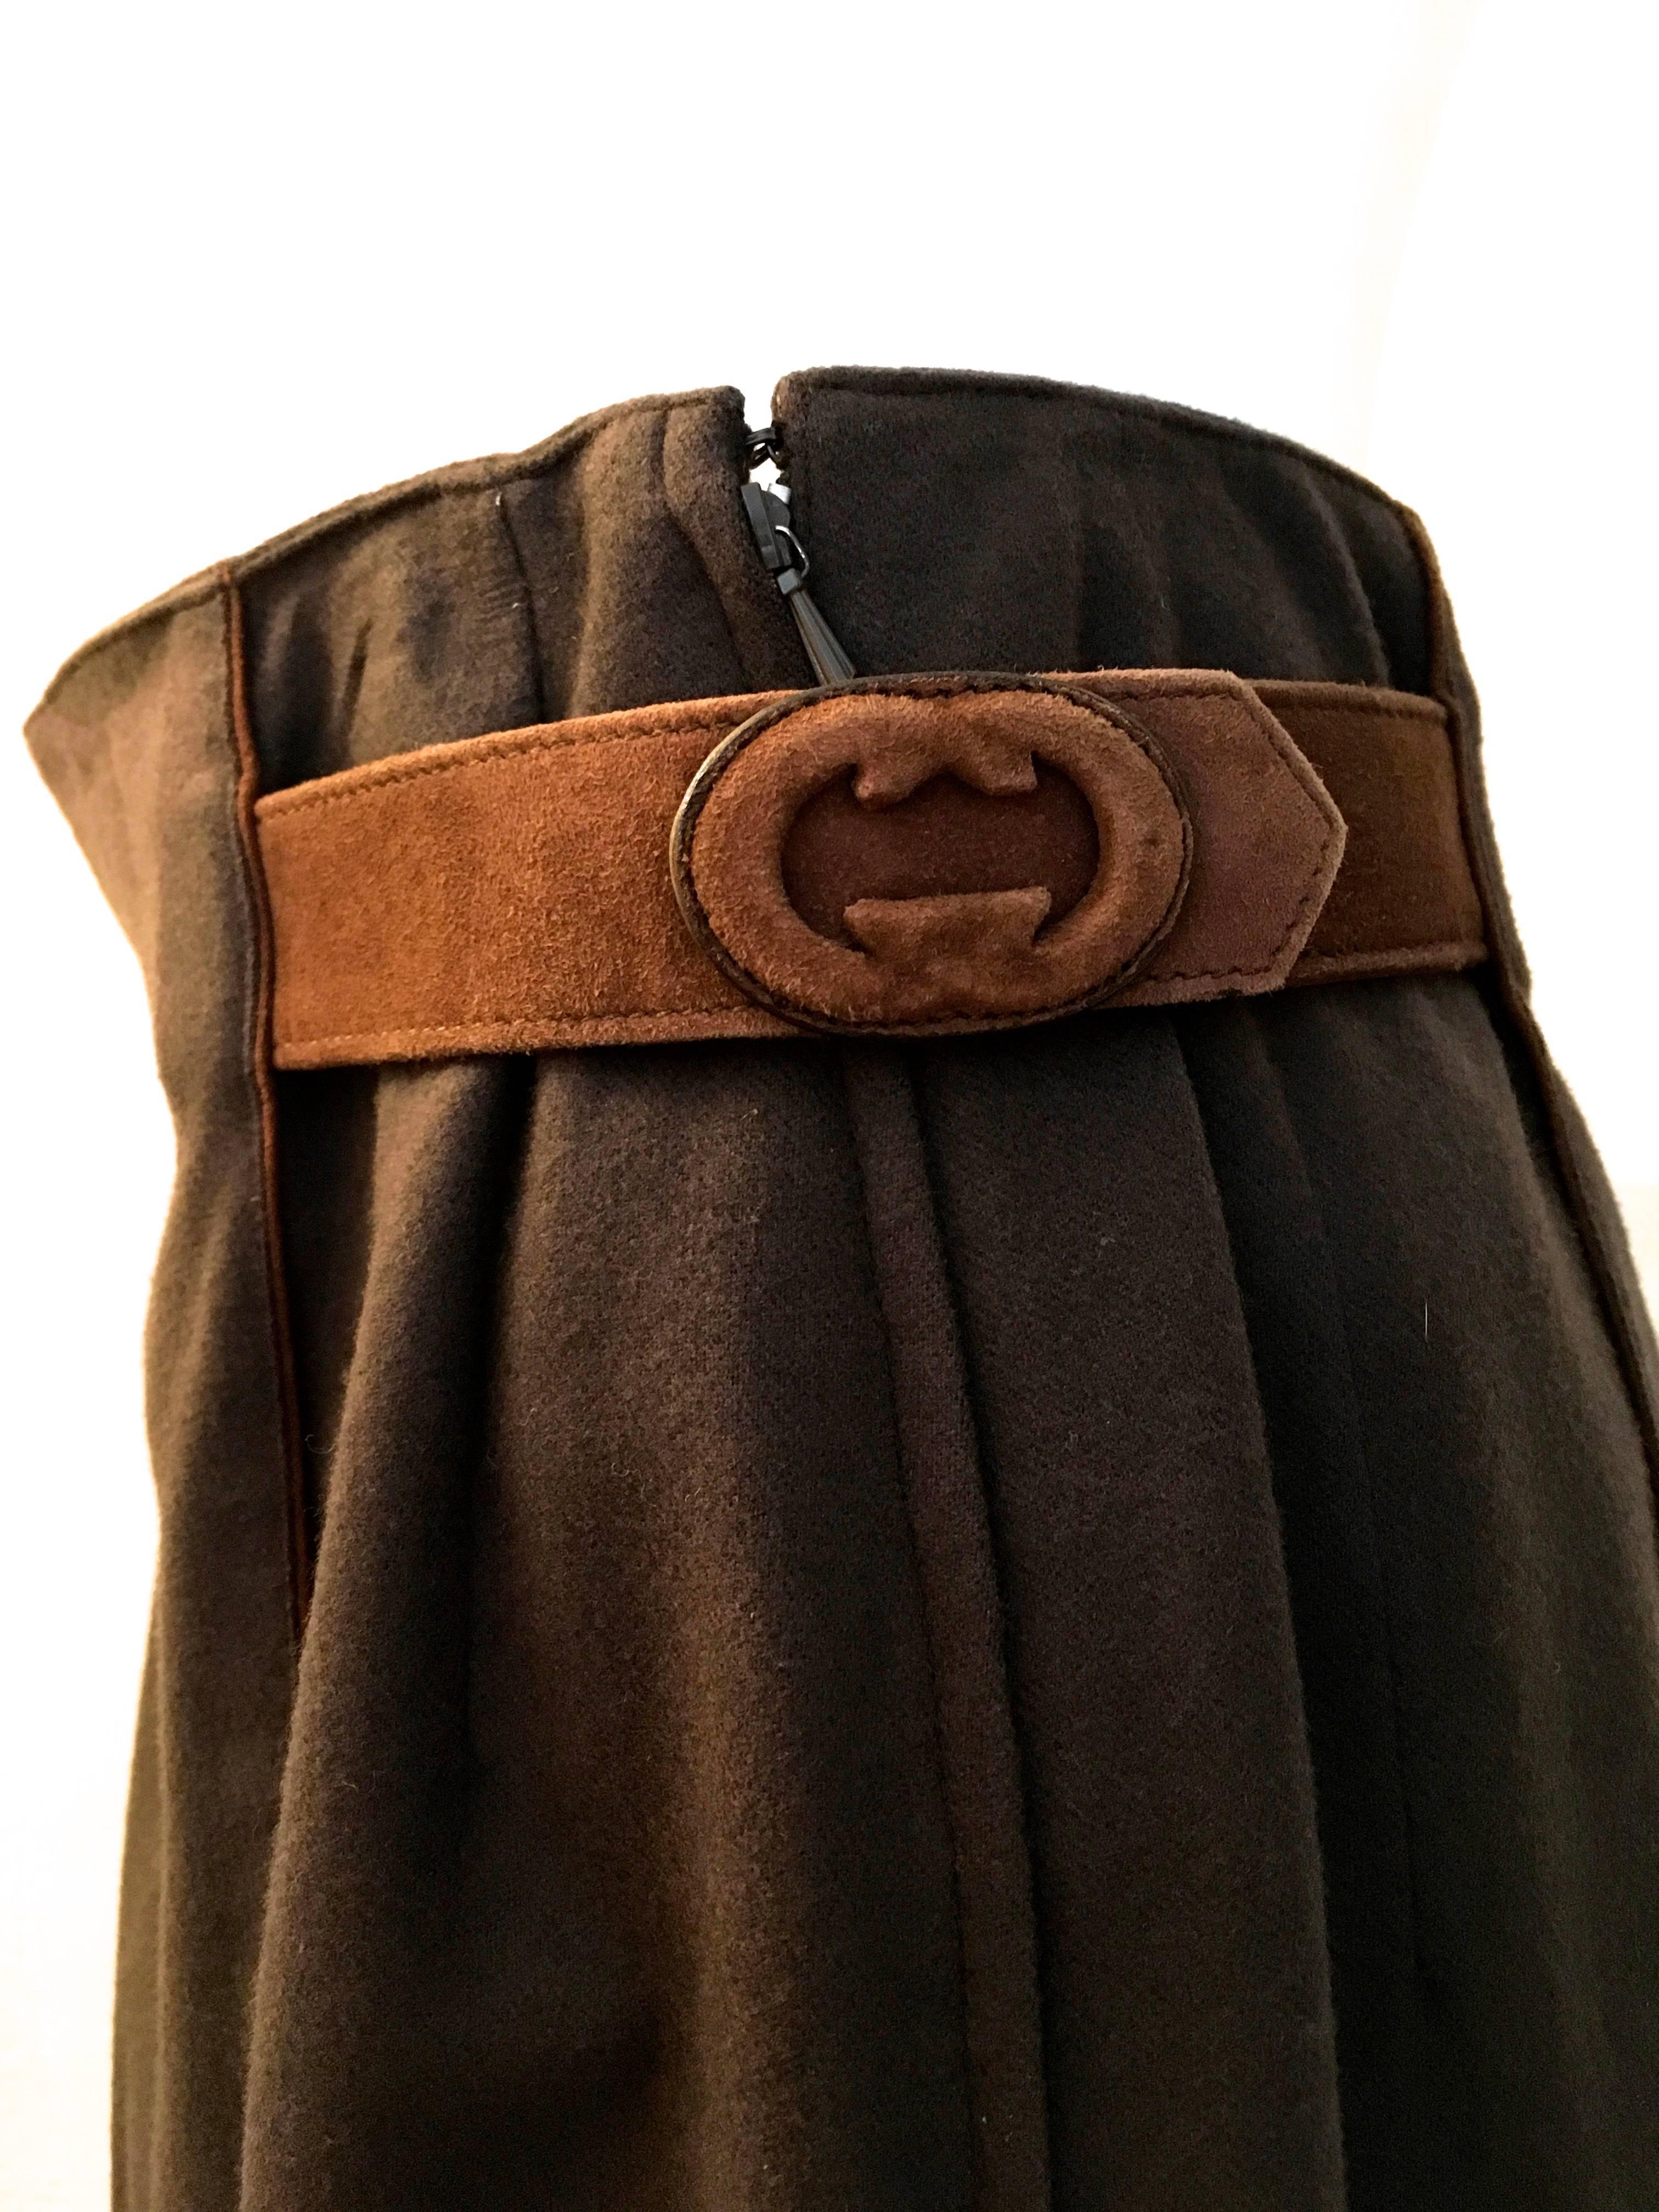 Gucci Skirt w/ Leather Belt - Rare In New Condition For Sale In Boca Raton, FL